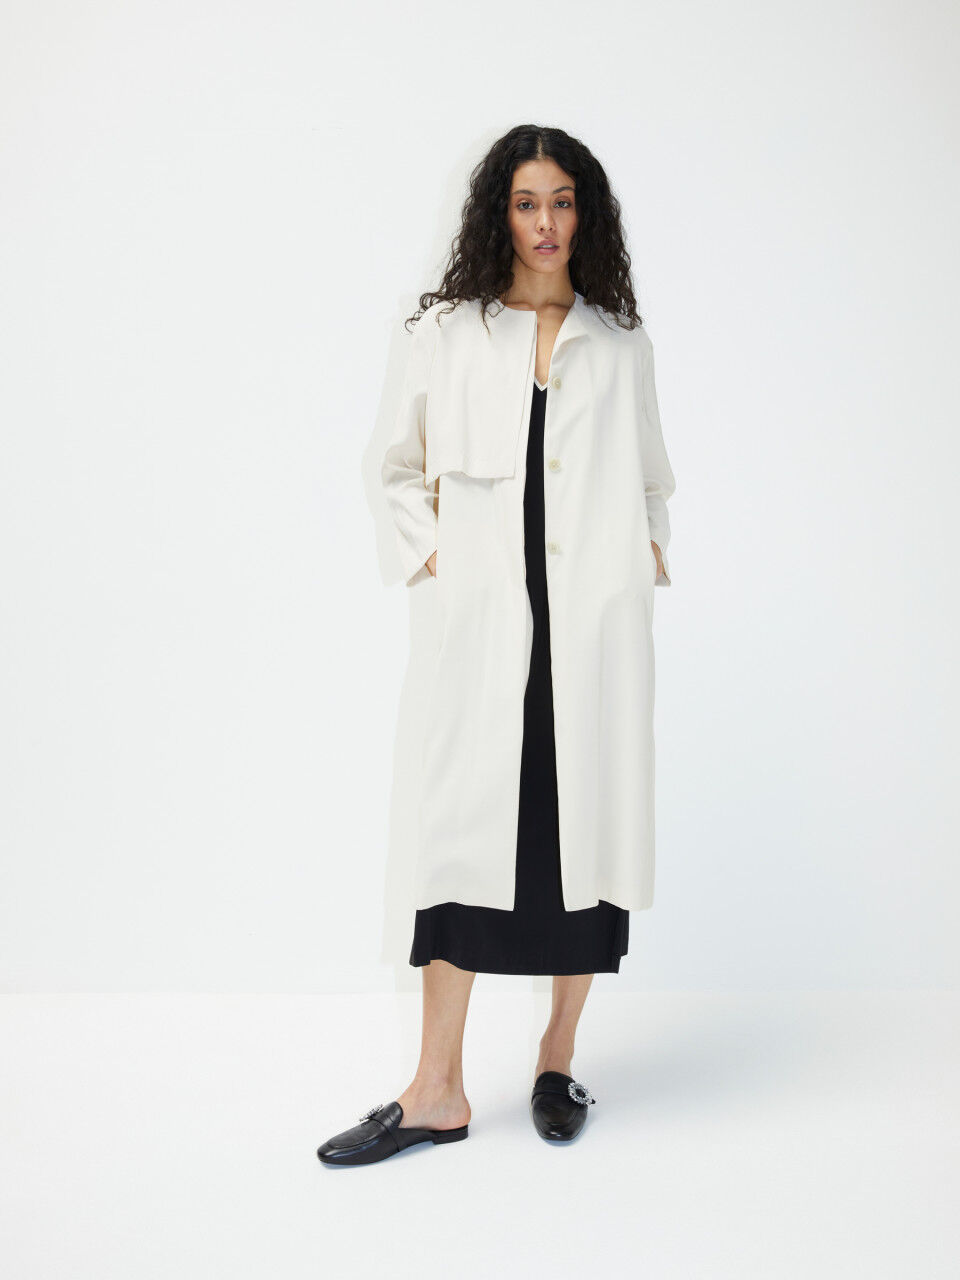 Women's Trench Coats 2022 Collection | Sisley World